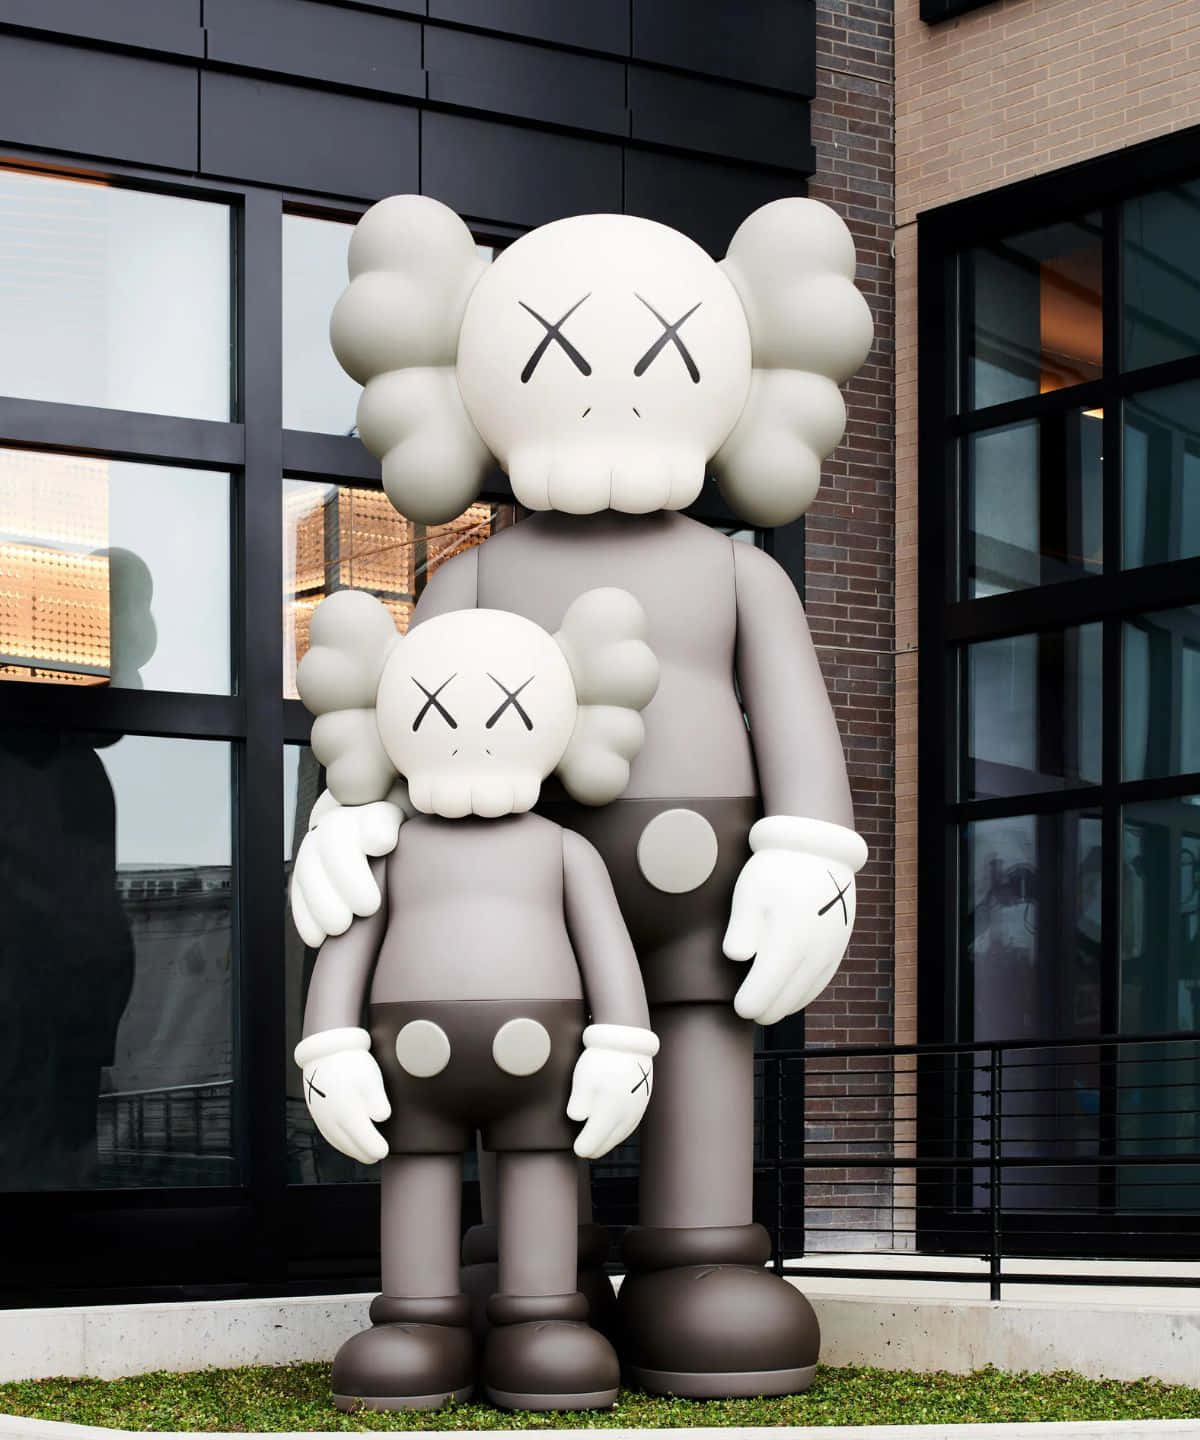 KAWS Figures Collection in Vibrant Display Wallpaper